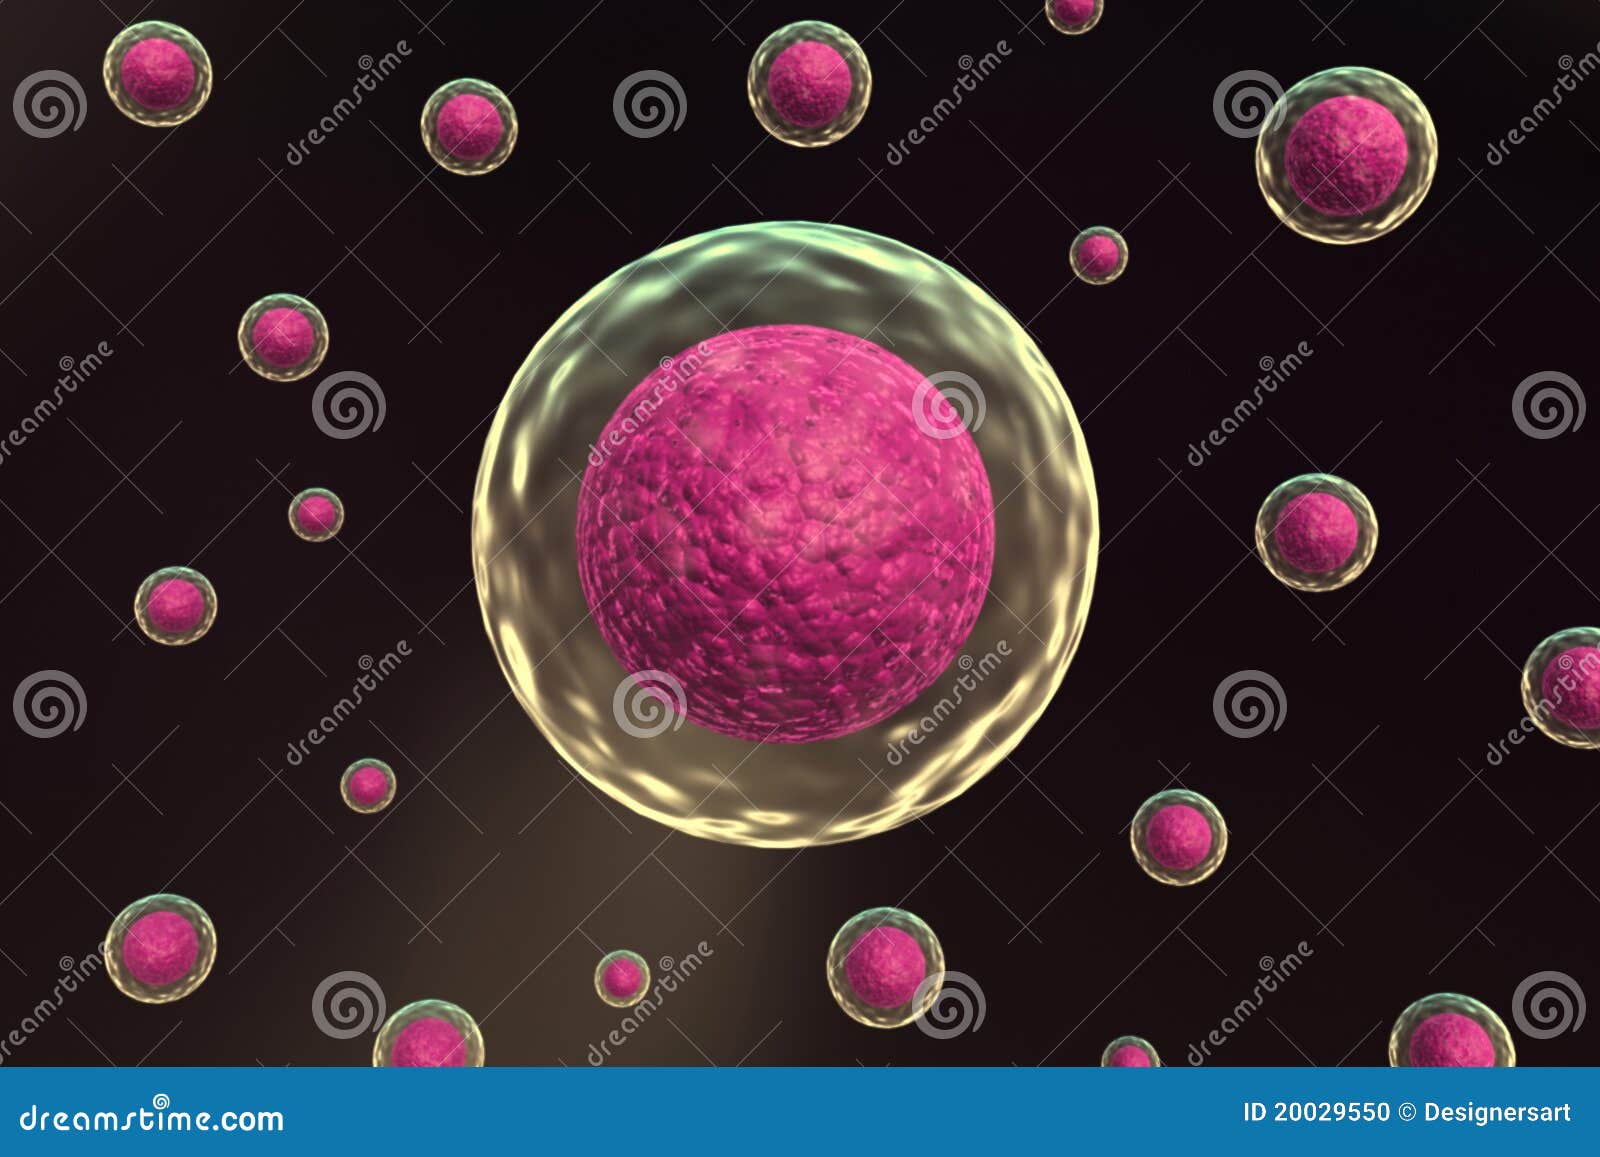 cell with nucleus